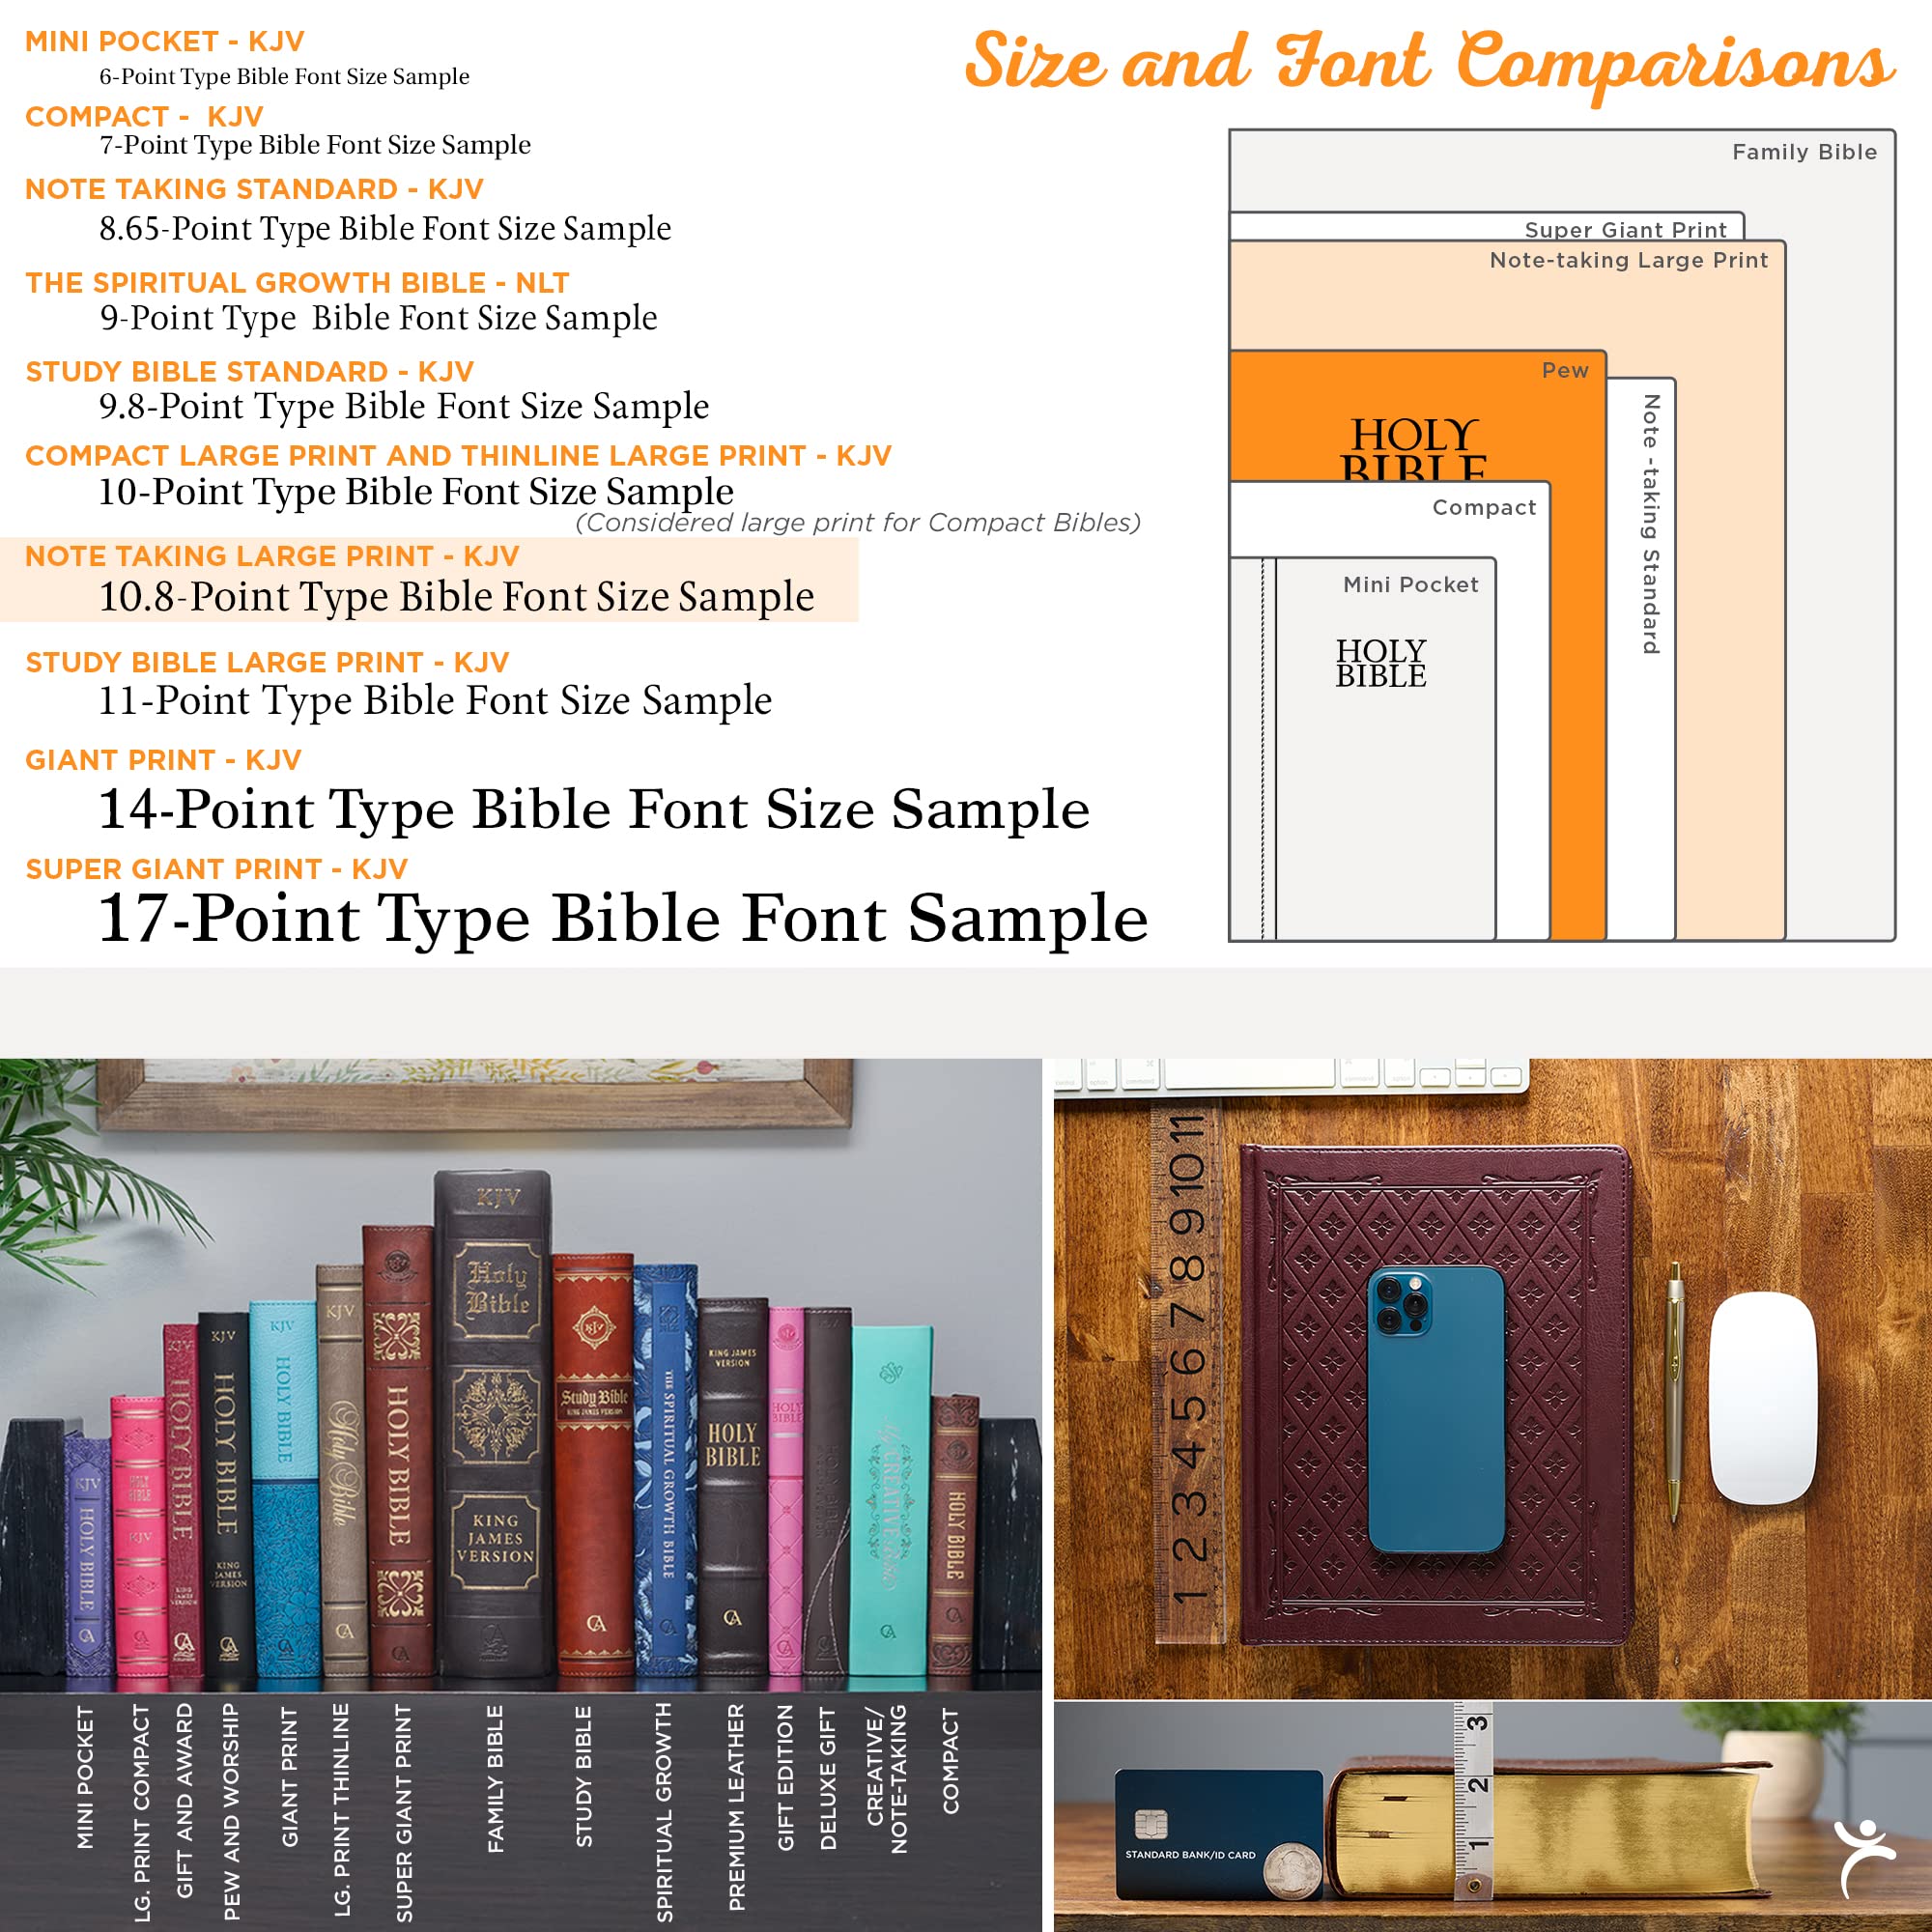 KJV Holy Bible, Large Print Note-taking Bible, Faux Leather Hardcover - King James Version, Pearlescent Mauve